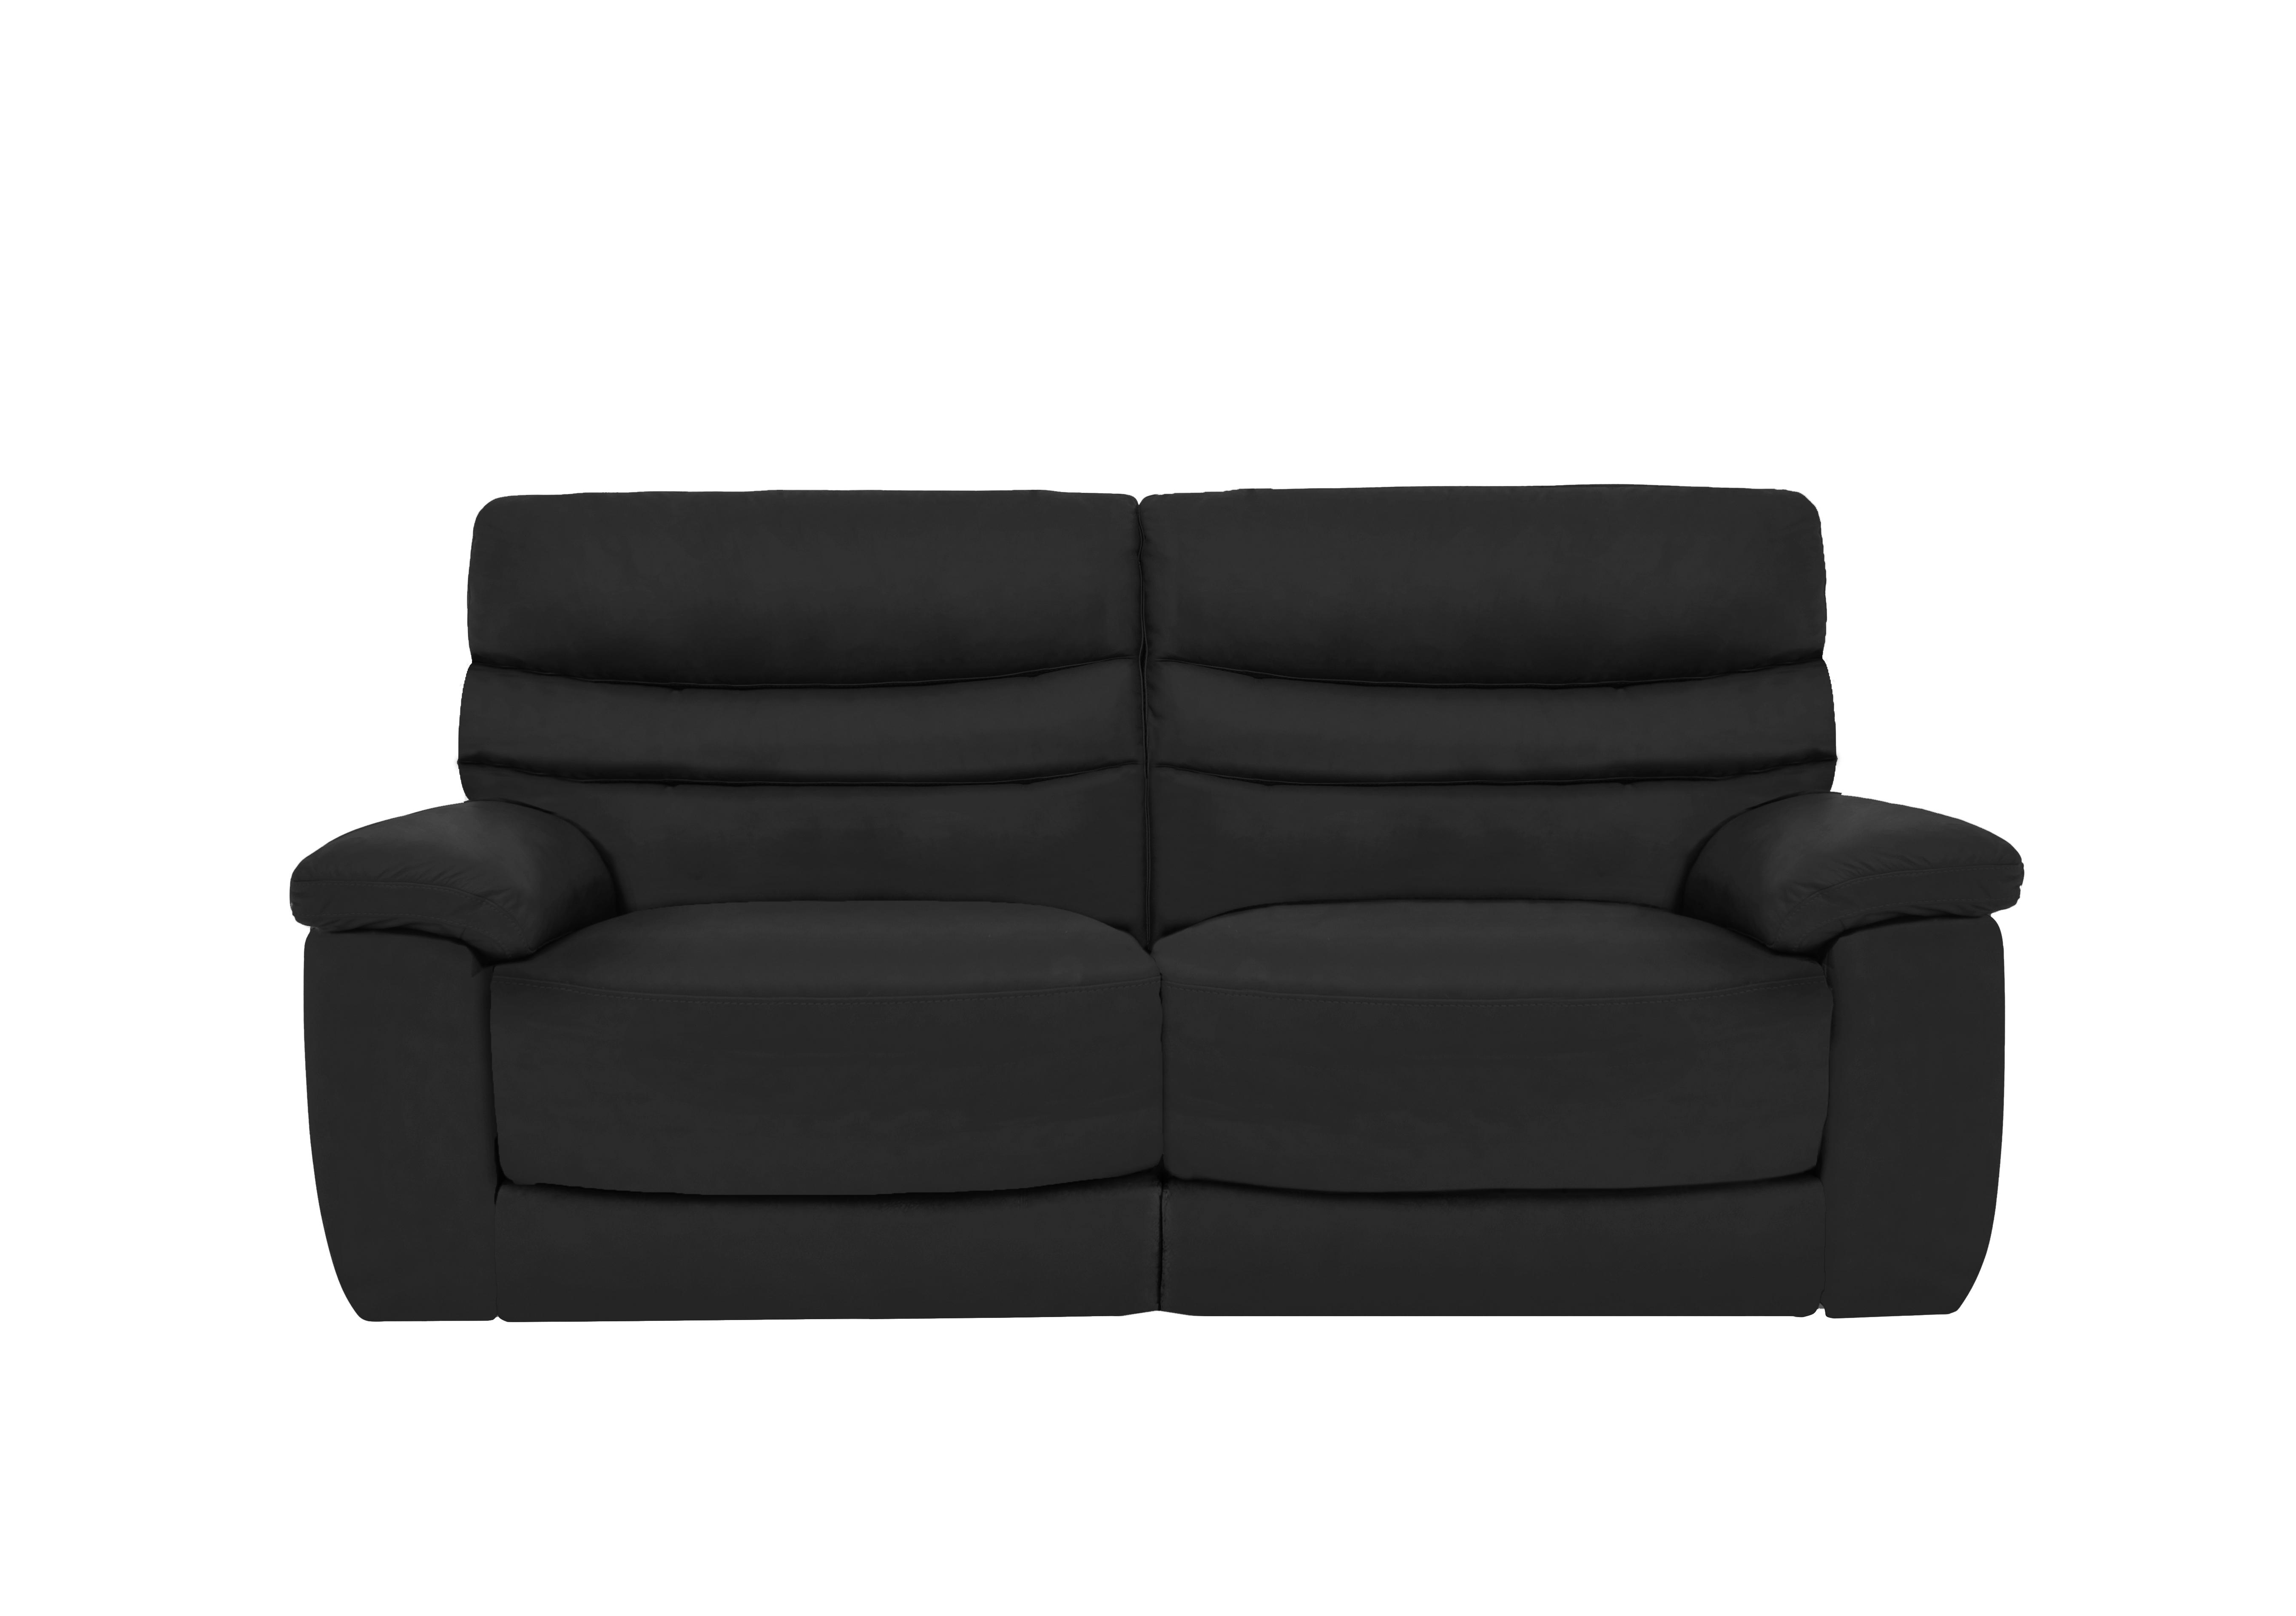 Nimbus 3 Seater Leather Power Recliner Sofa with Power Headrests and Power Lumbar in Bx-023c Black on Furniture Village